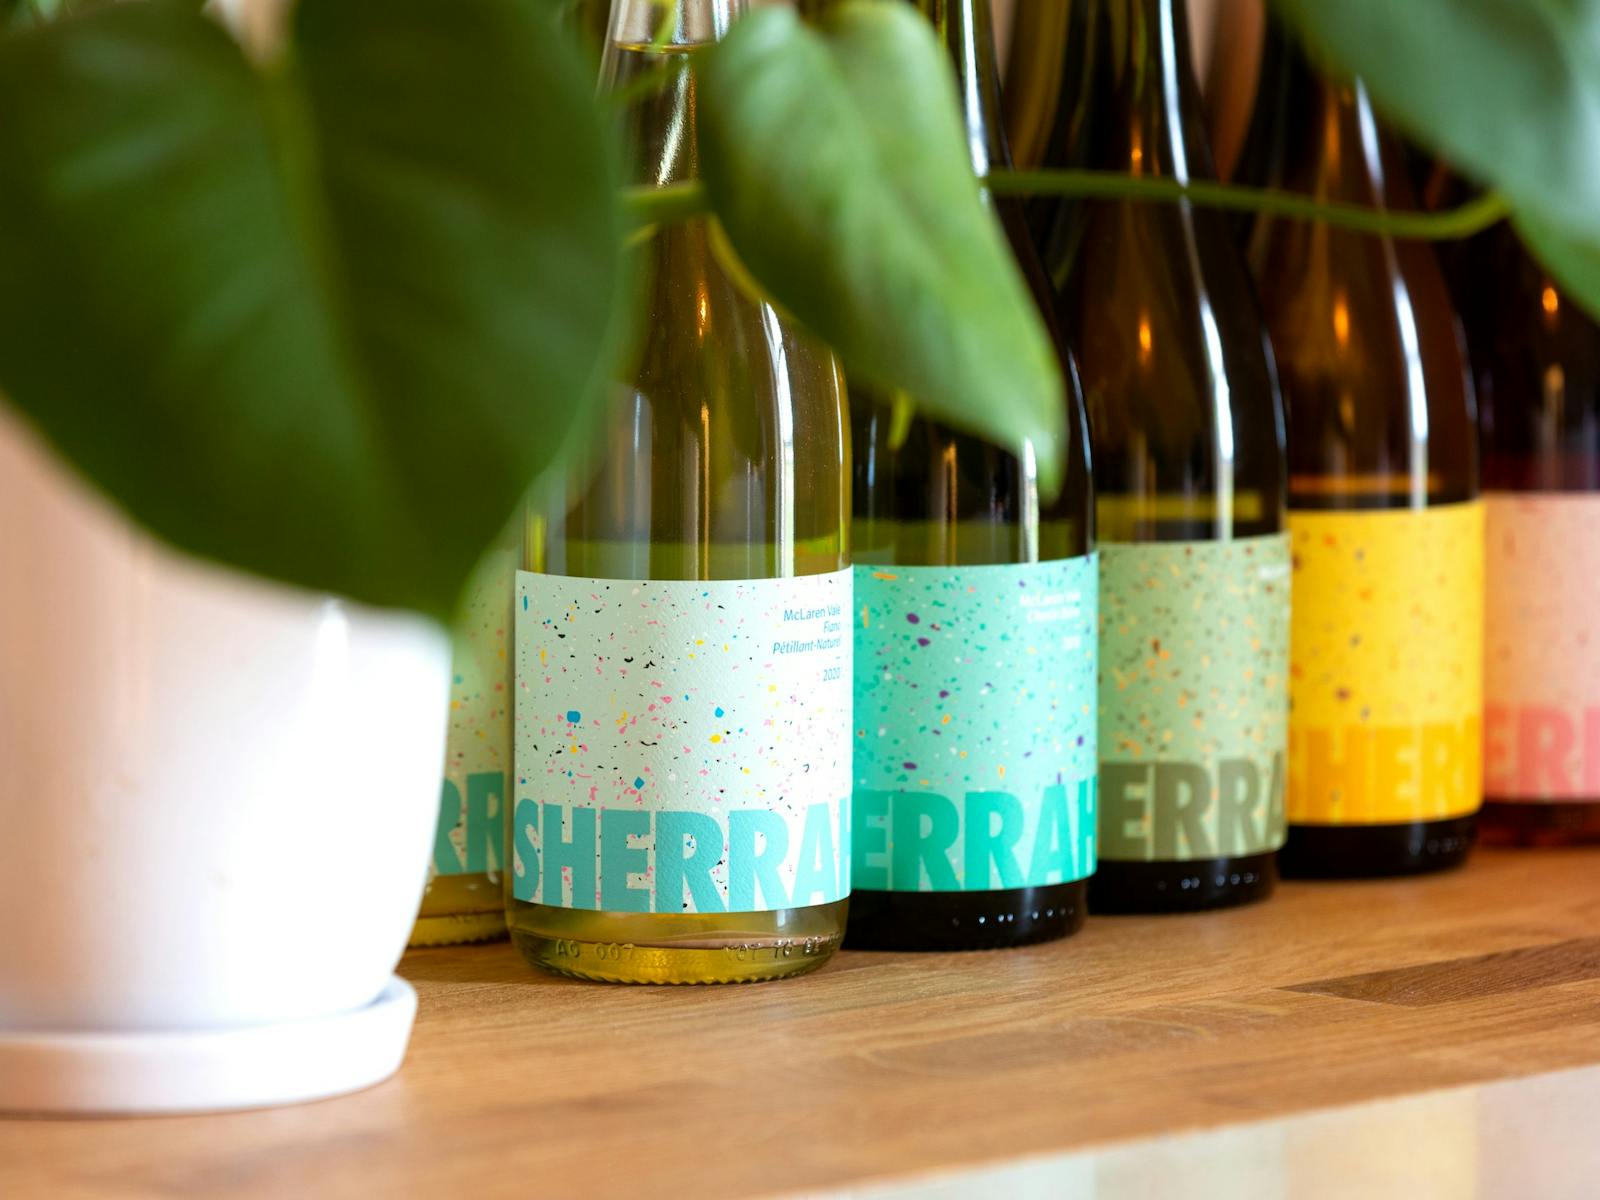 Beautiful labels, all colours of the rainbow